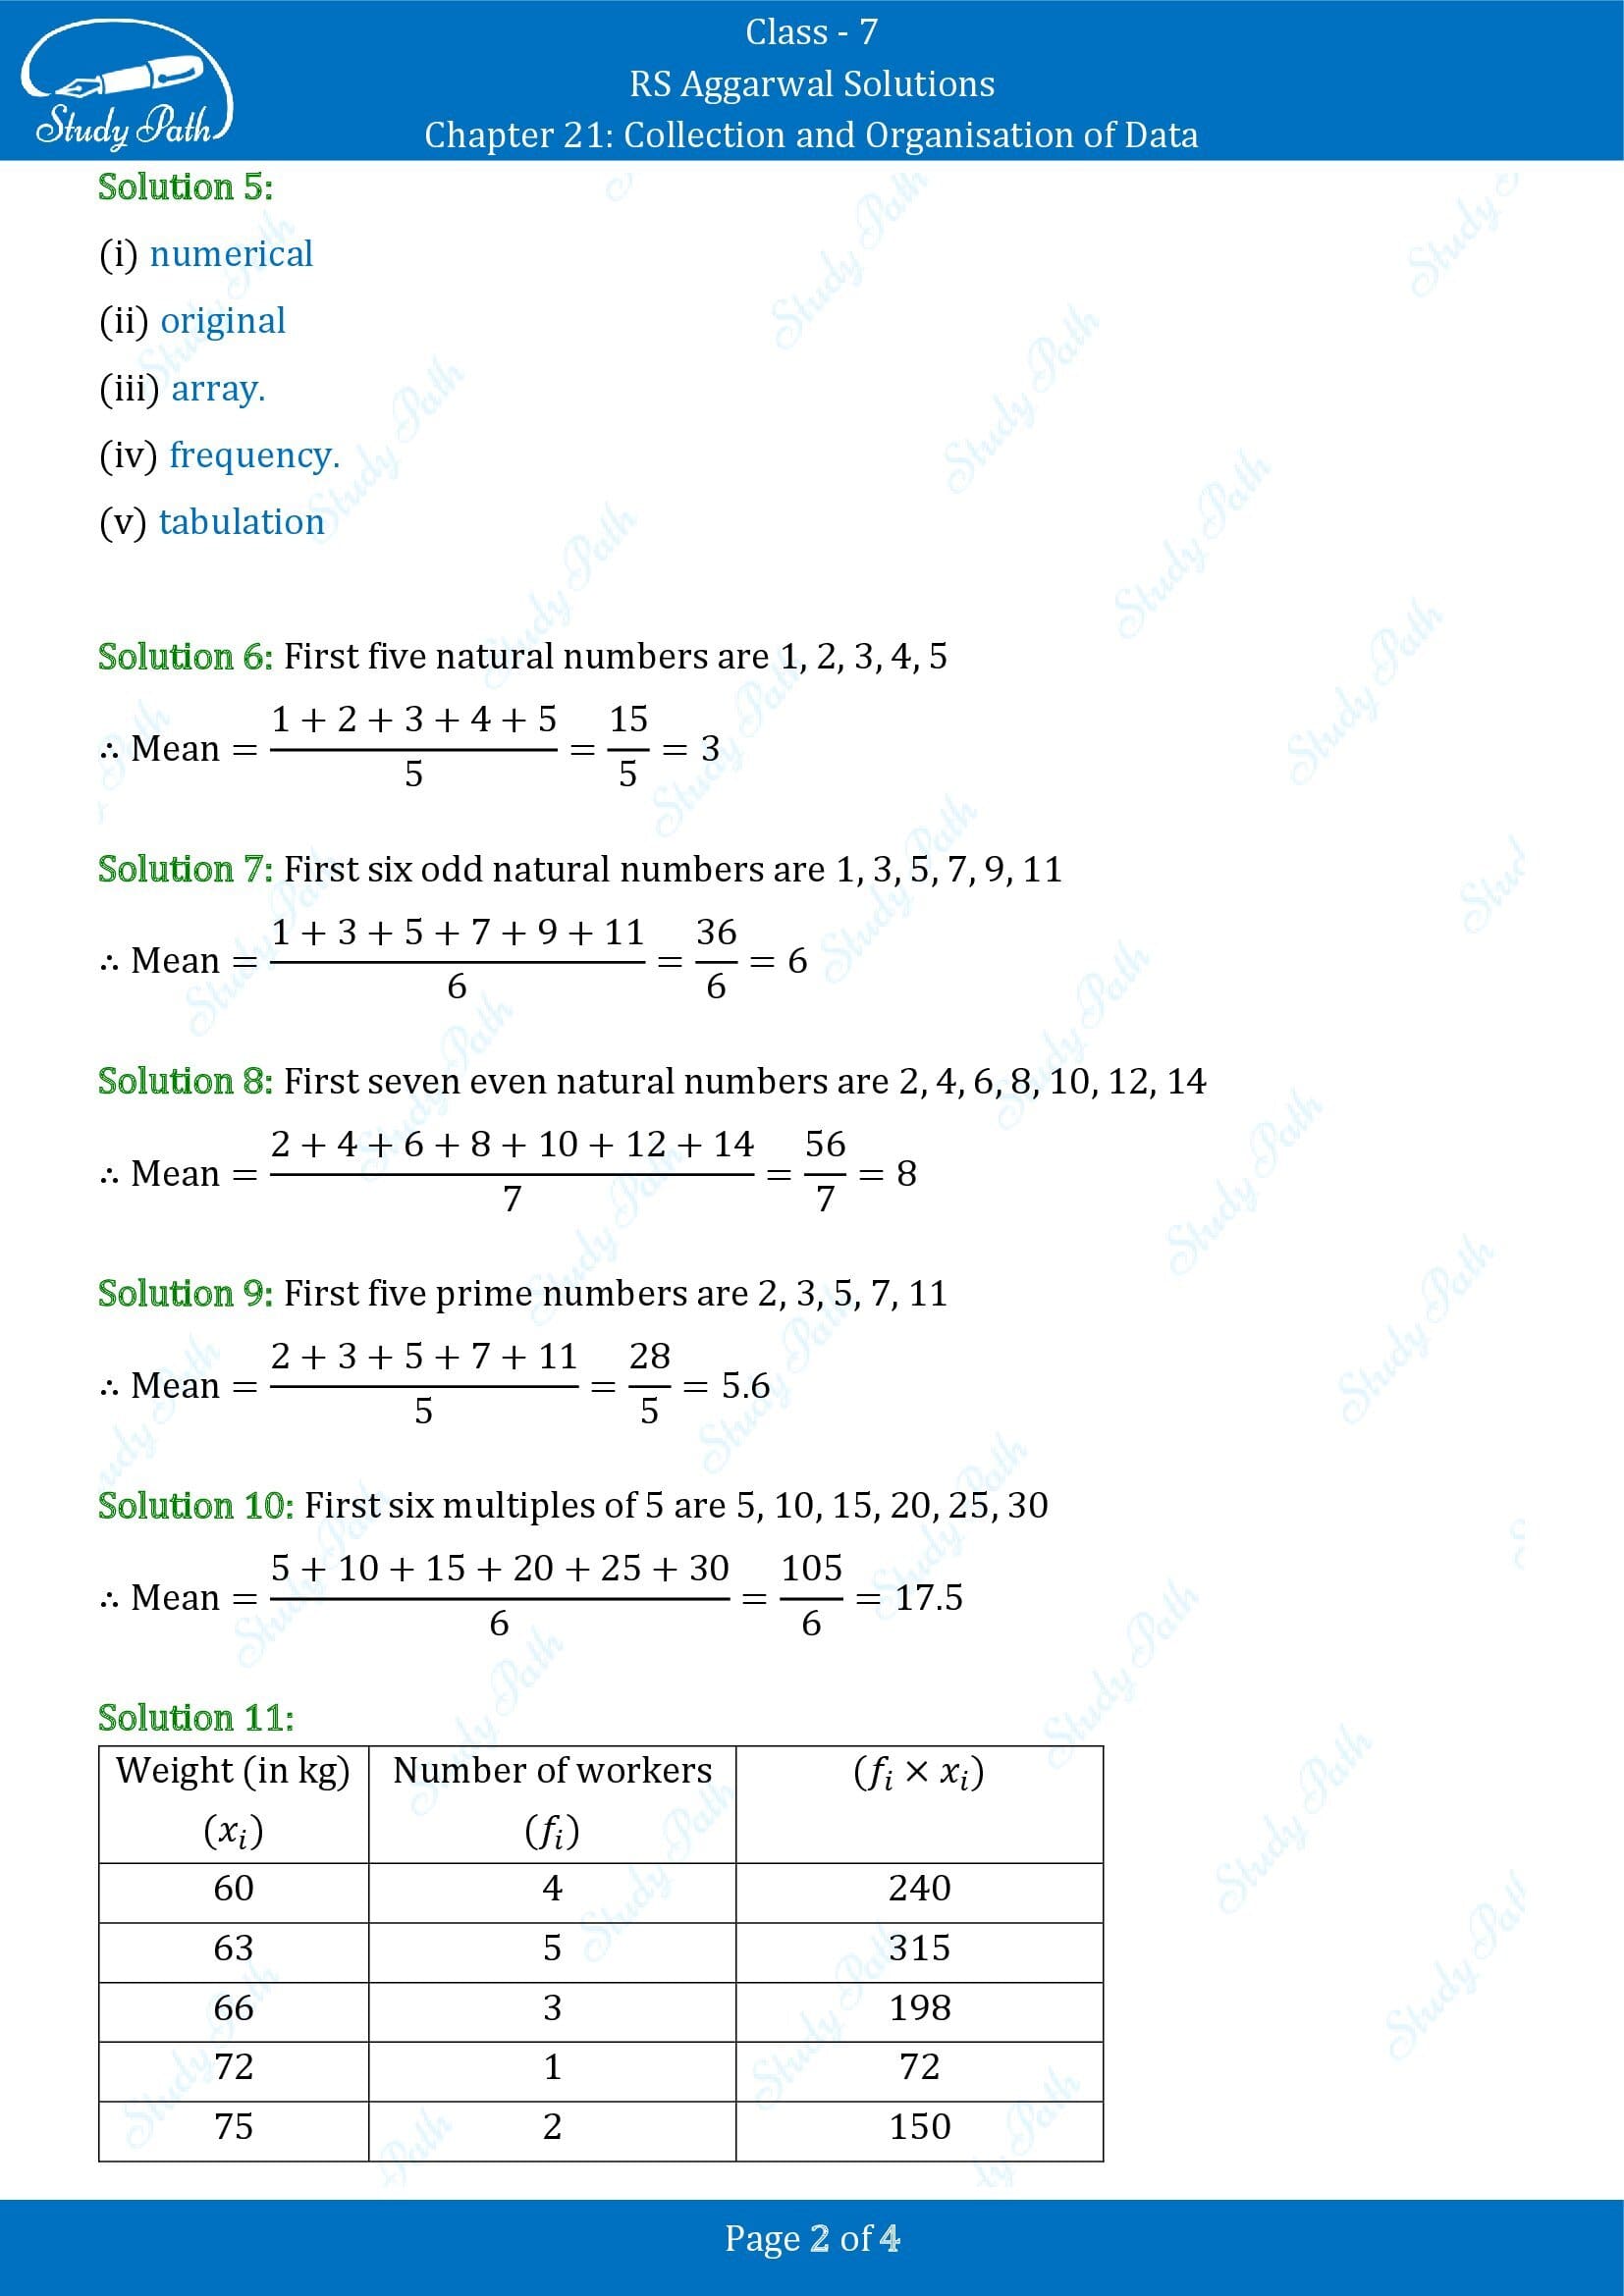 RS Aggarwal Solutions Class 7 Chapter 21 Collection and Organisation of Data Exercise 21A 0002